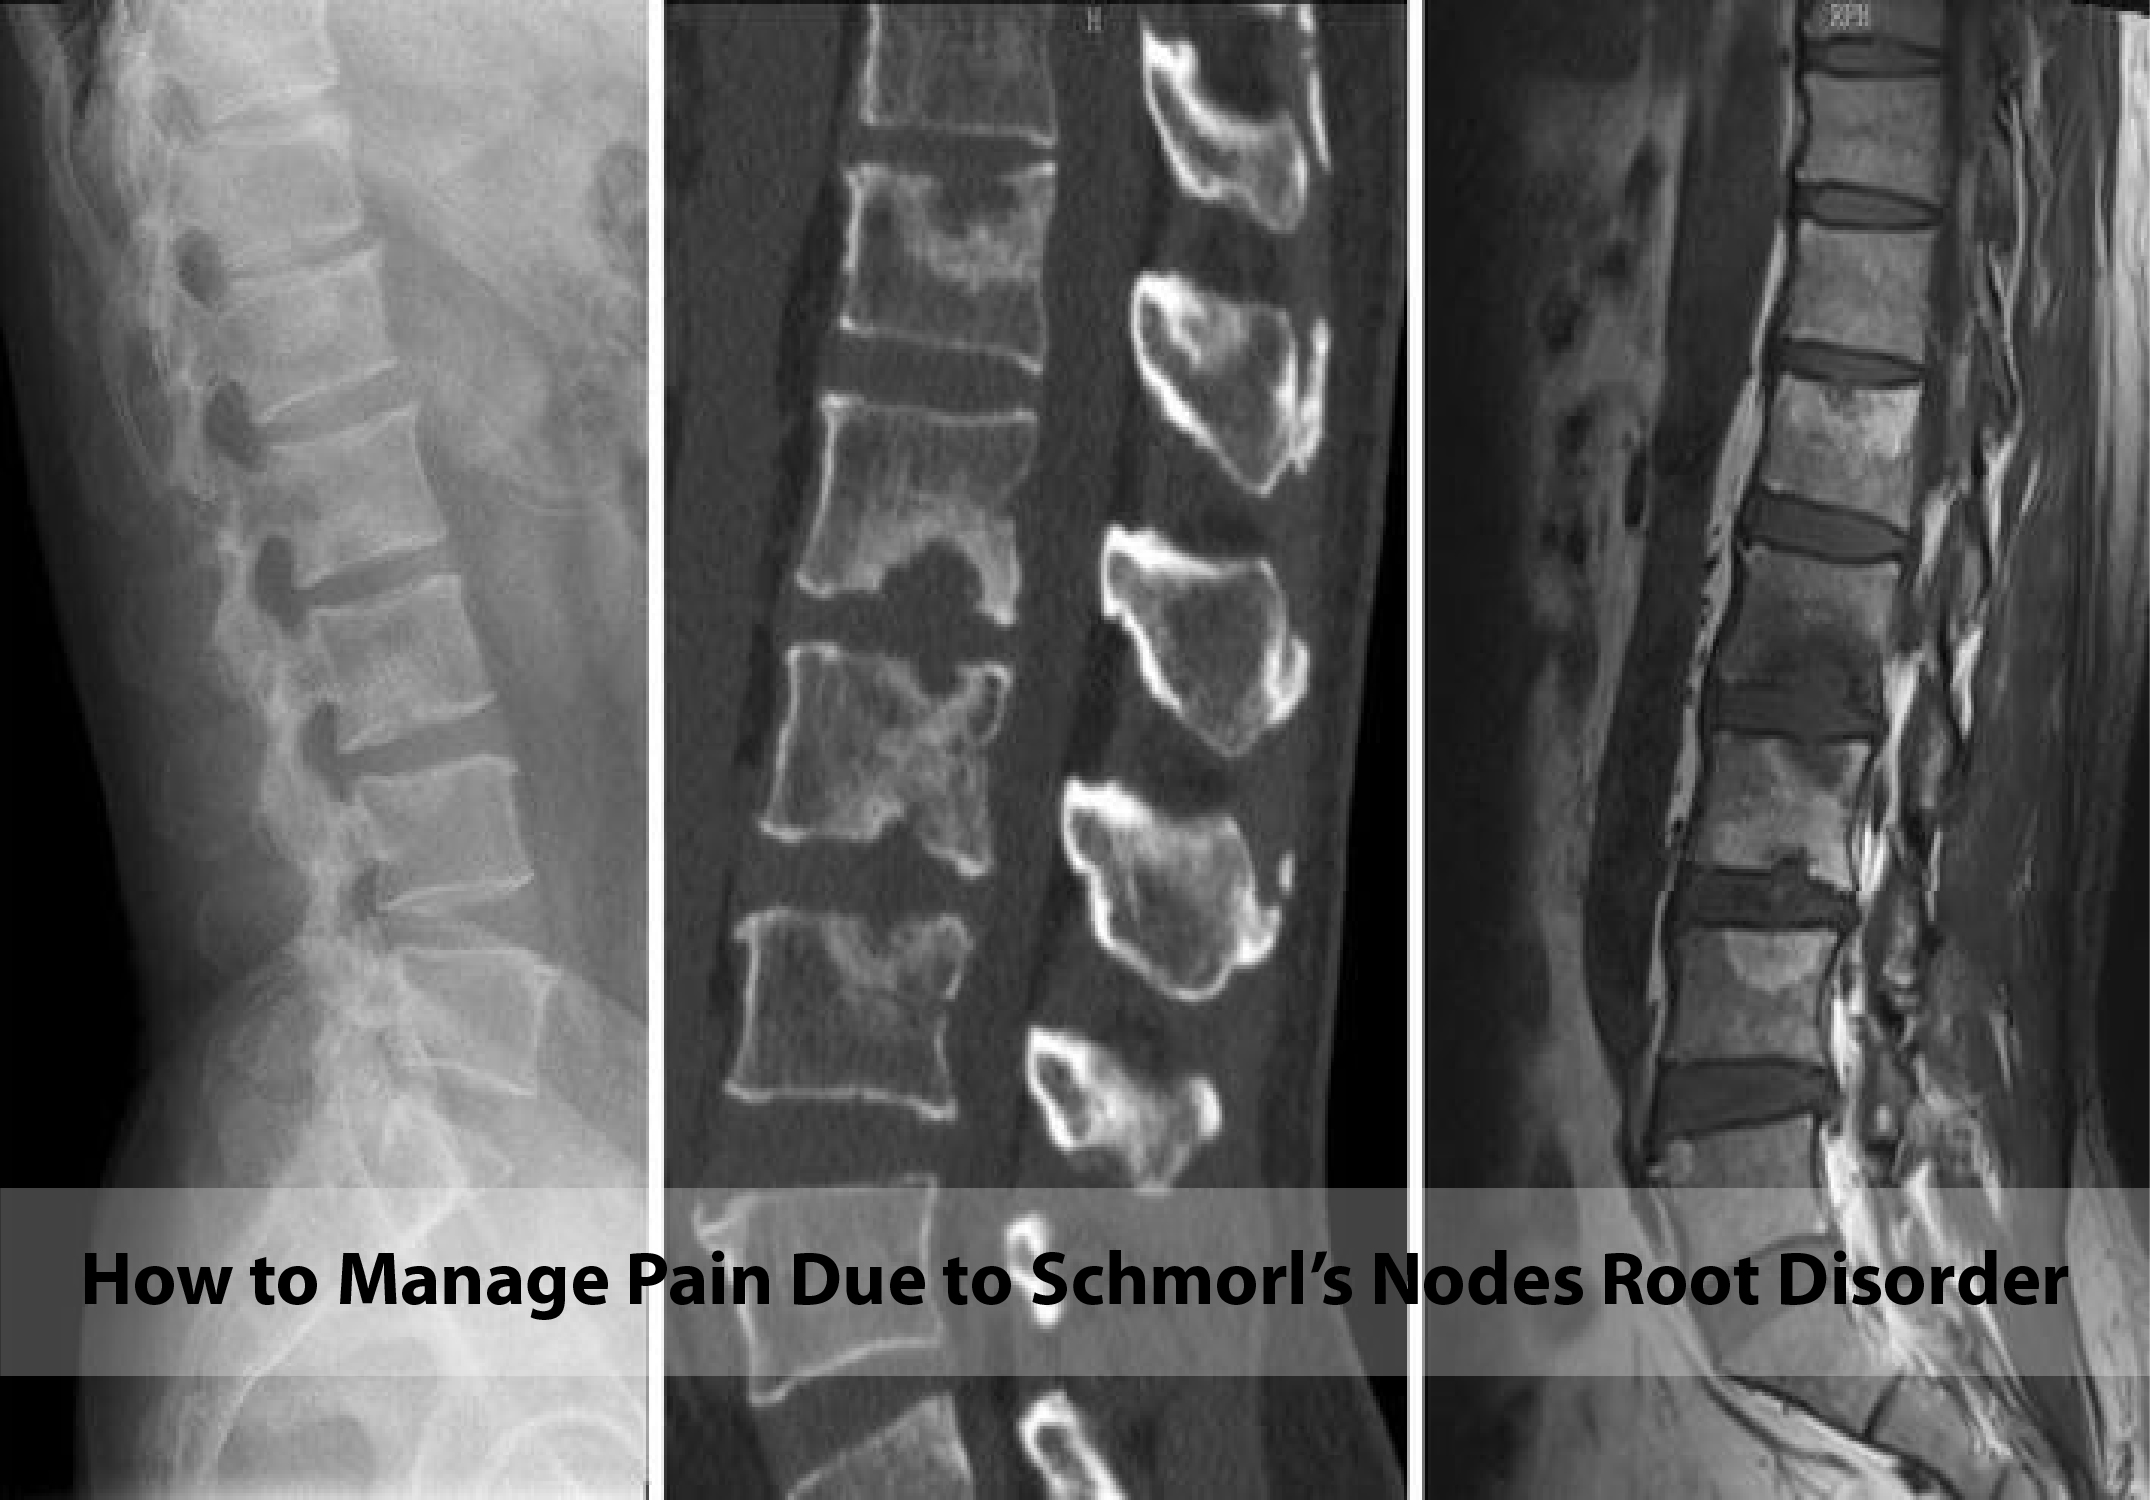 How to Manage Pain Due to Schmorl’s Nodes Root Disorder